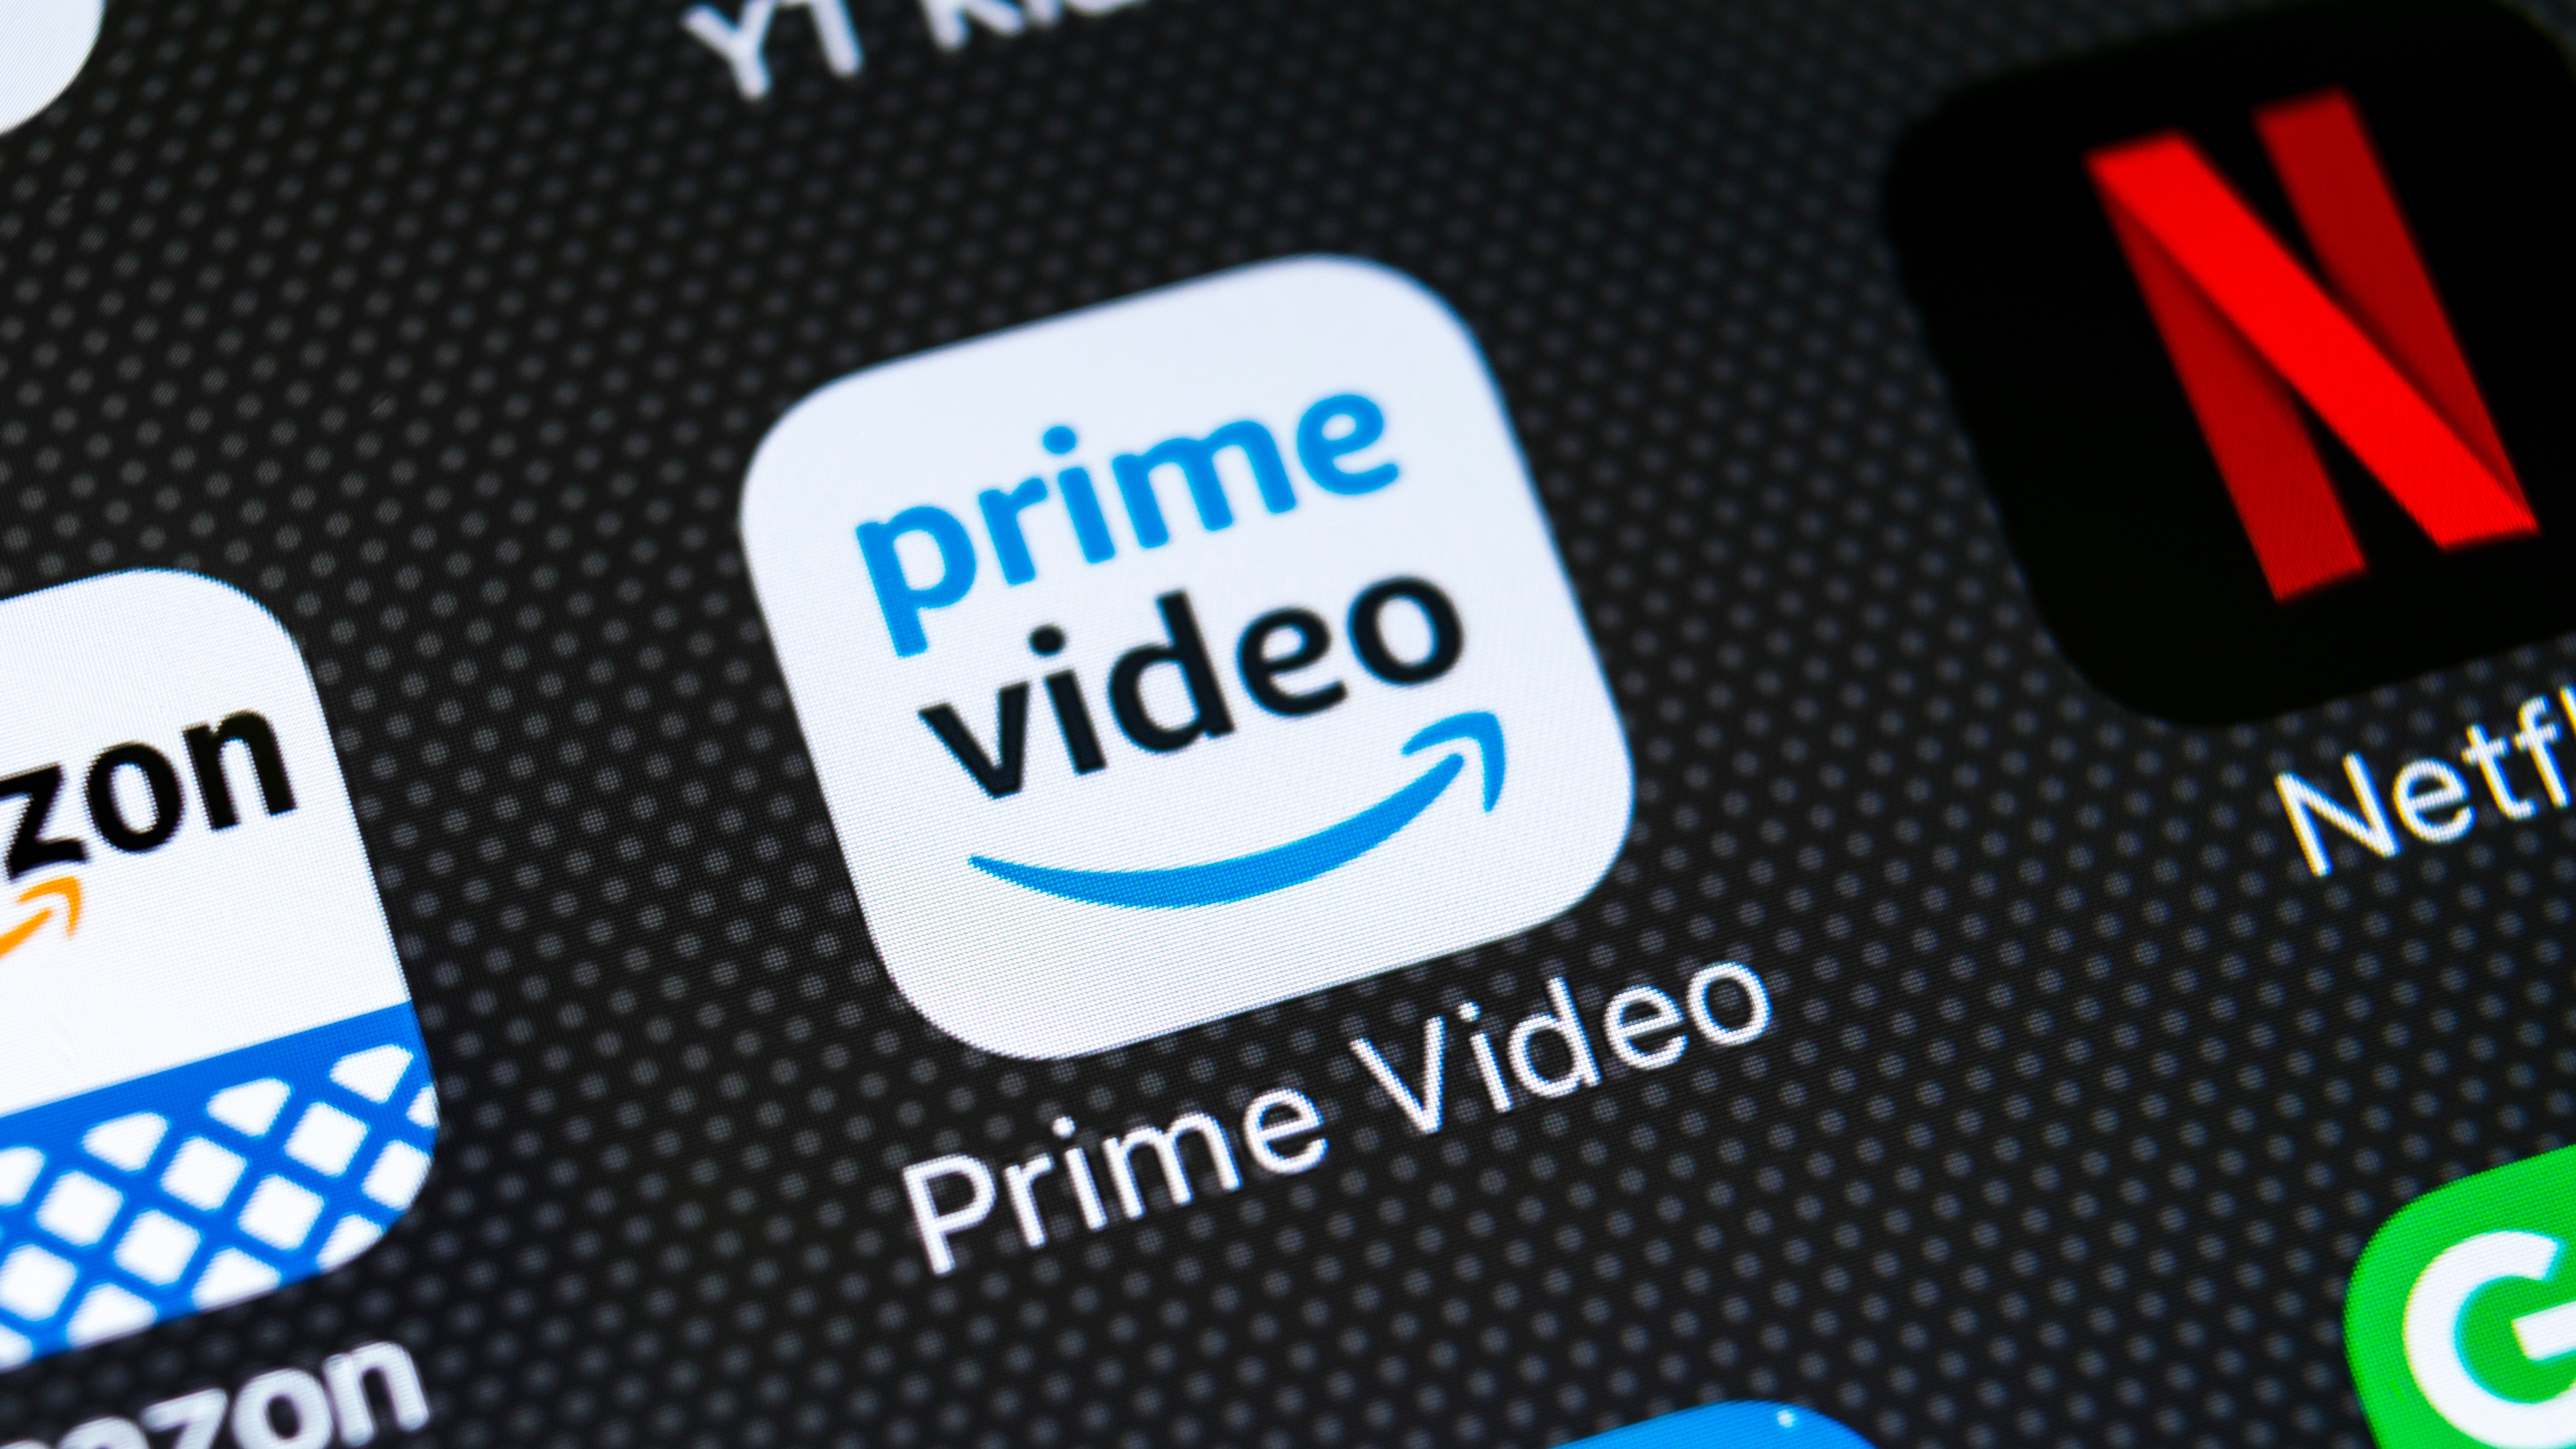 The app icon for Amazon Prime Video, one of the best streaming services